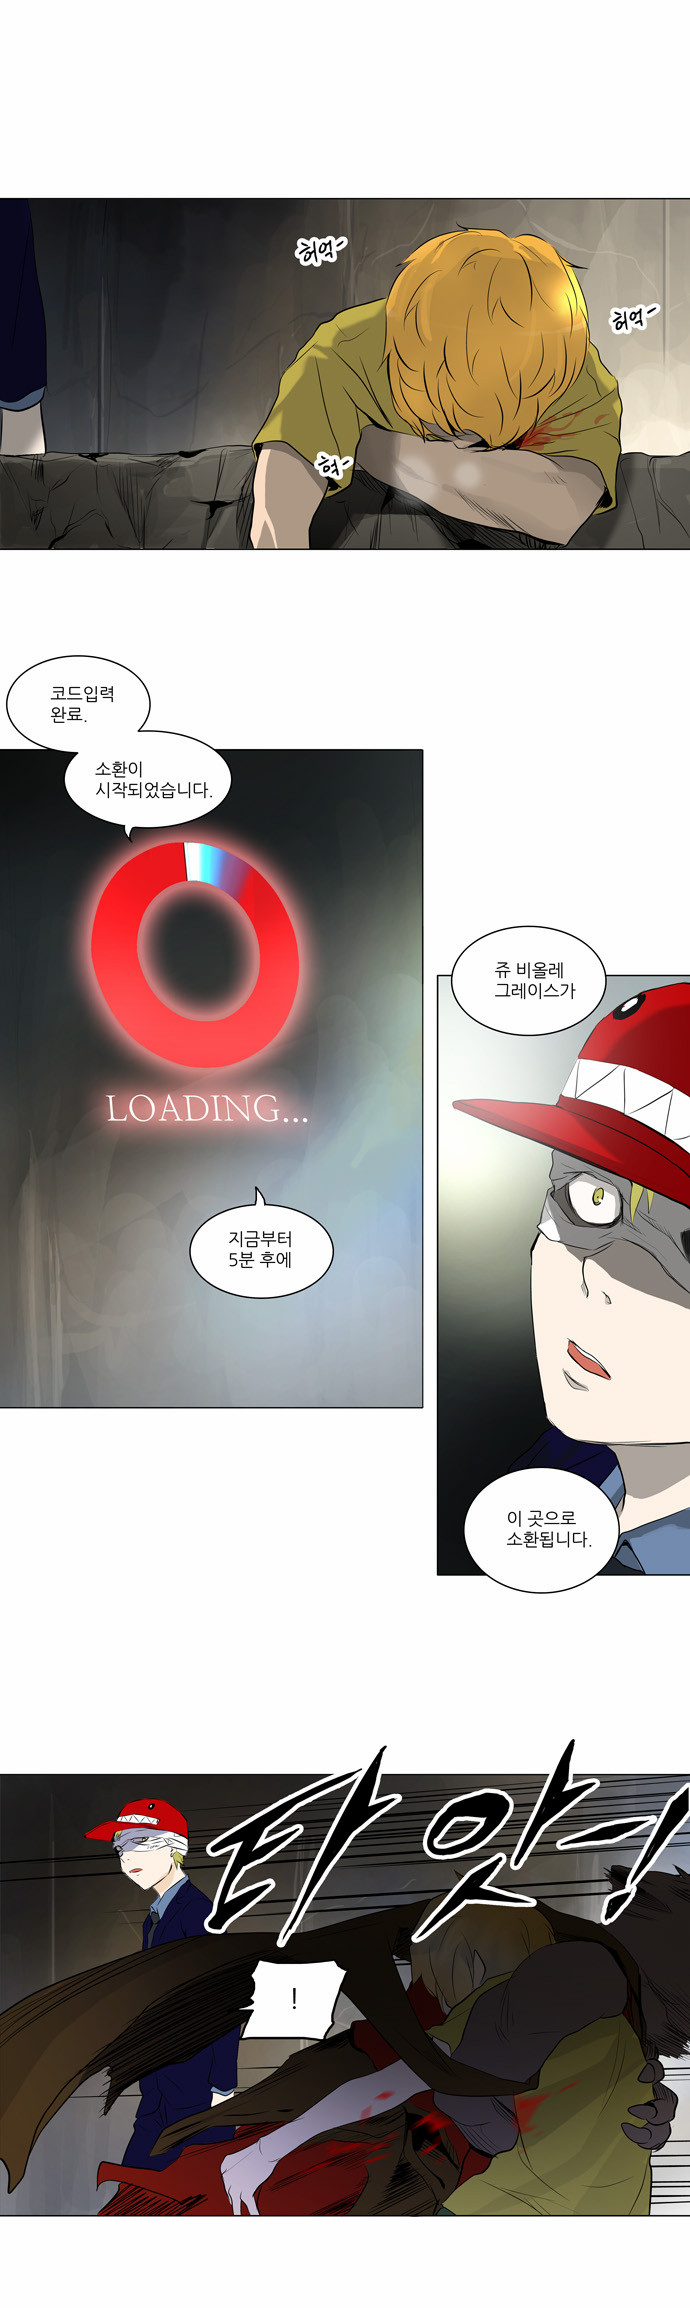 Tower of God - Chapter 176 - Page 1